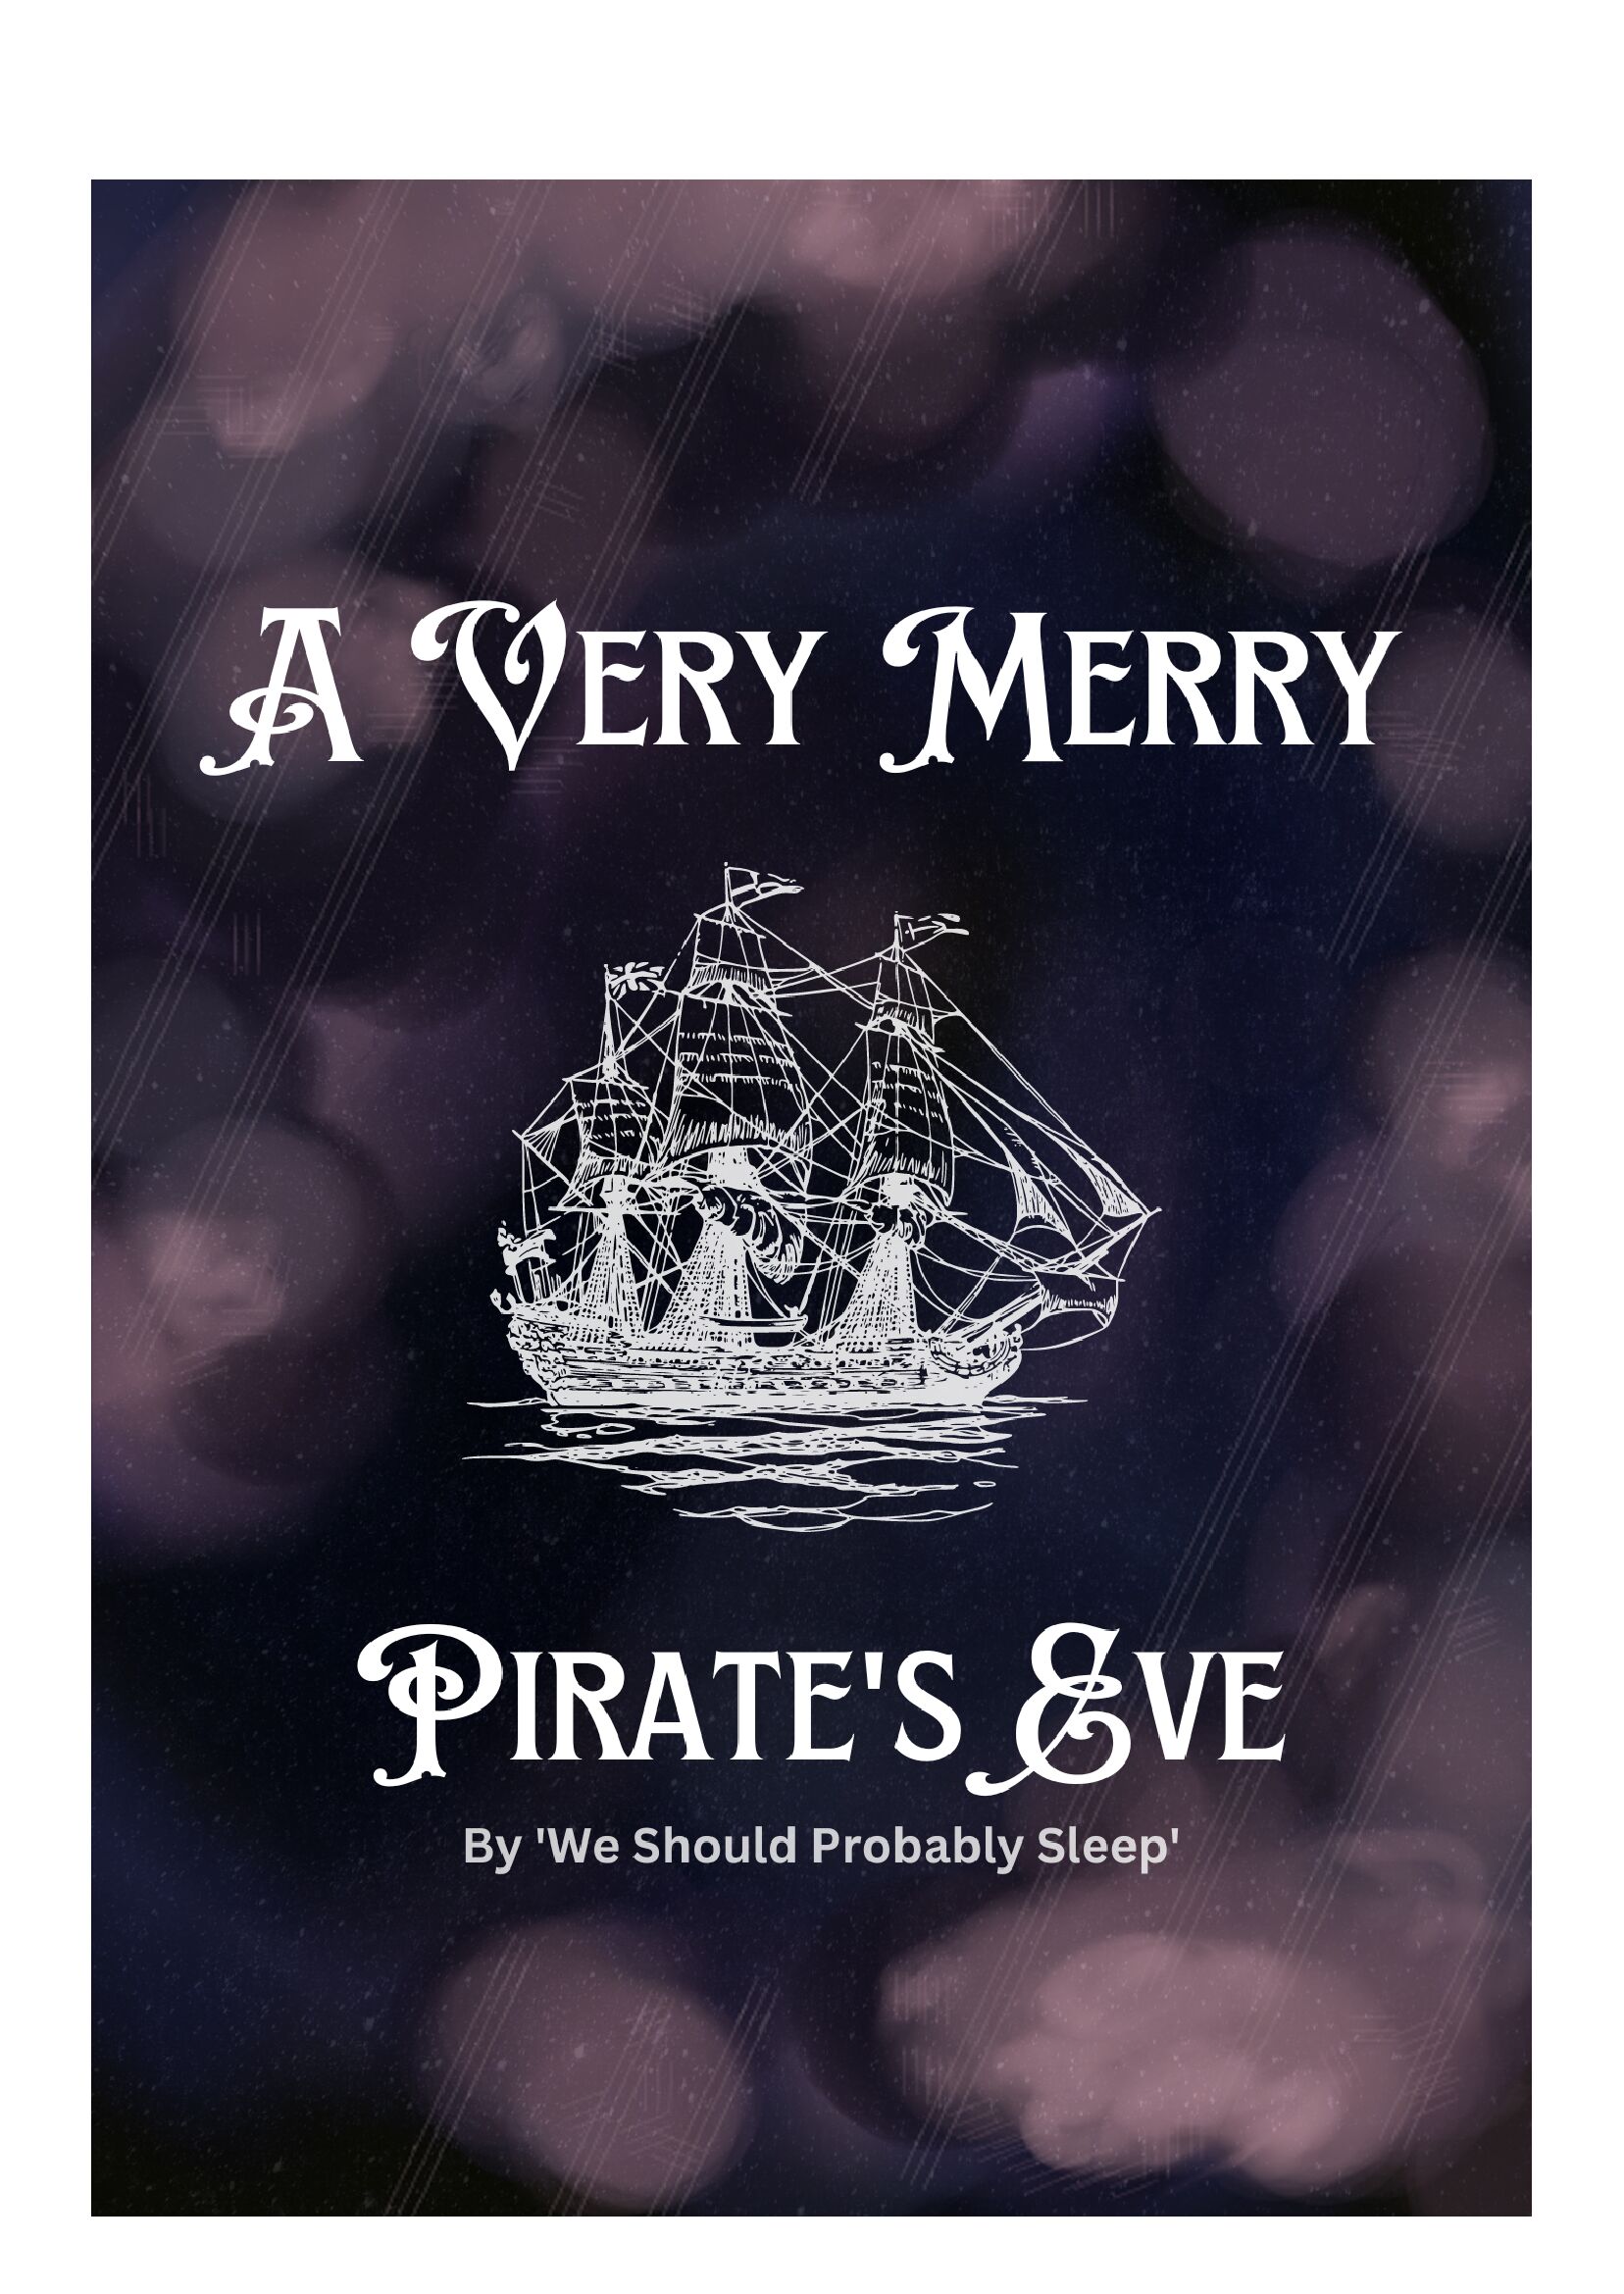 A Very Merry Pirate's Eve